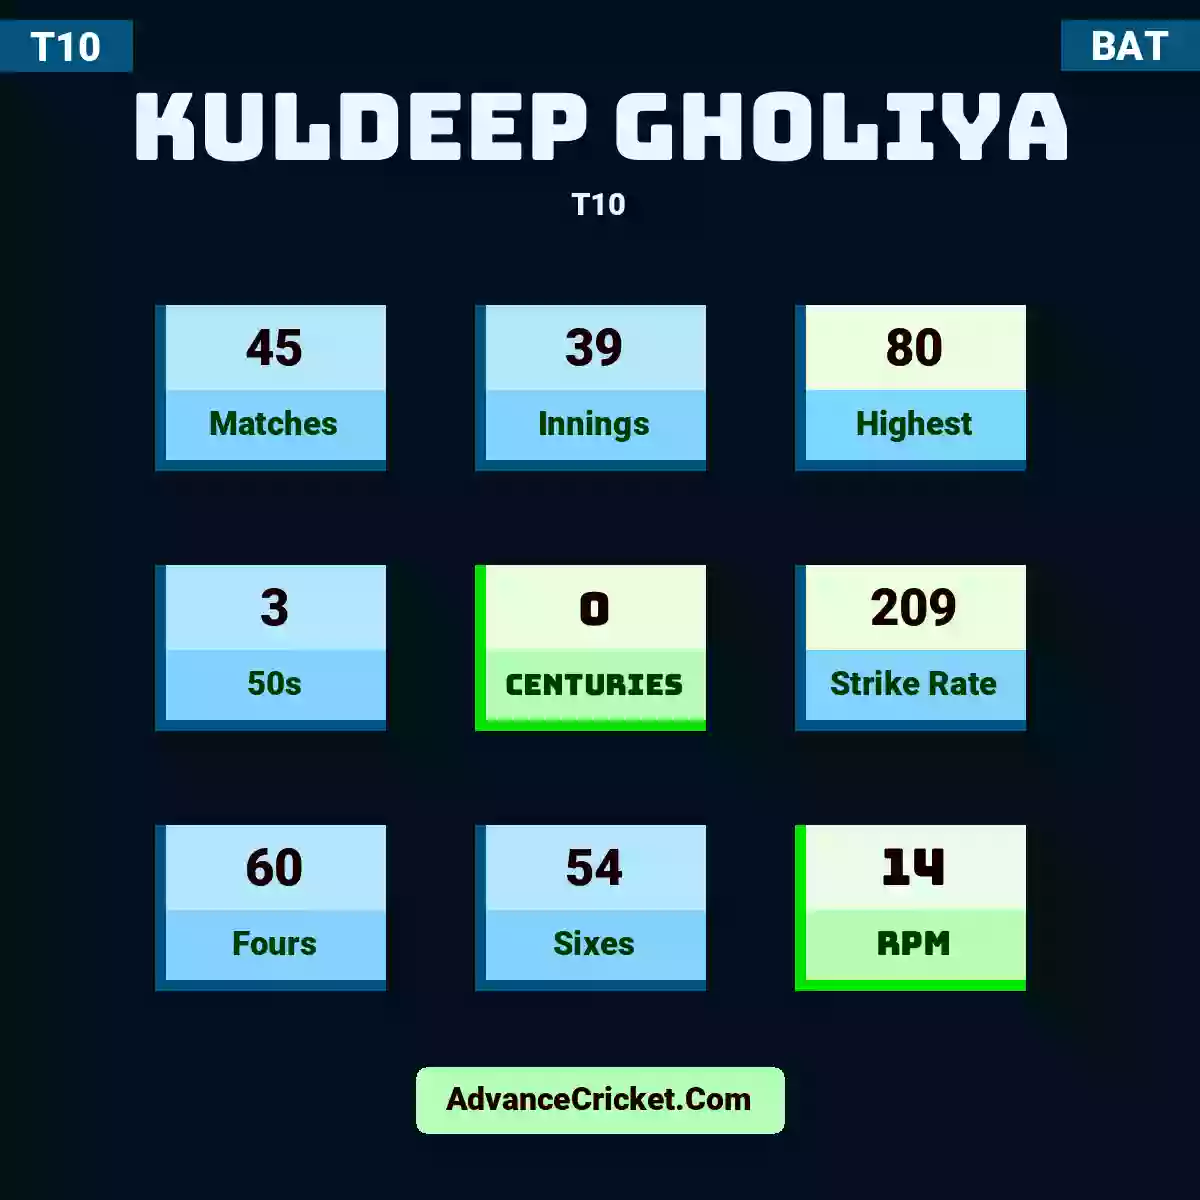 Kuldeep Gholiya T10 , Kuldeep Gholiya played 45 matches, scored 80 runs as highest, 3 half-centuries, and 0 centuries, with a strike rate of 209. K.Gholiya hit 60 fours and 54 sixes, with an RPM of 14.